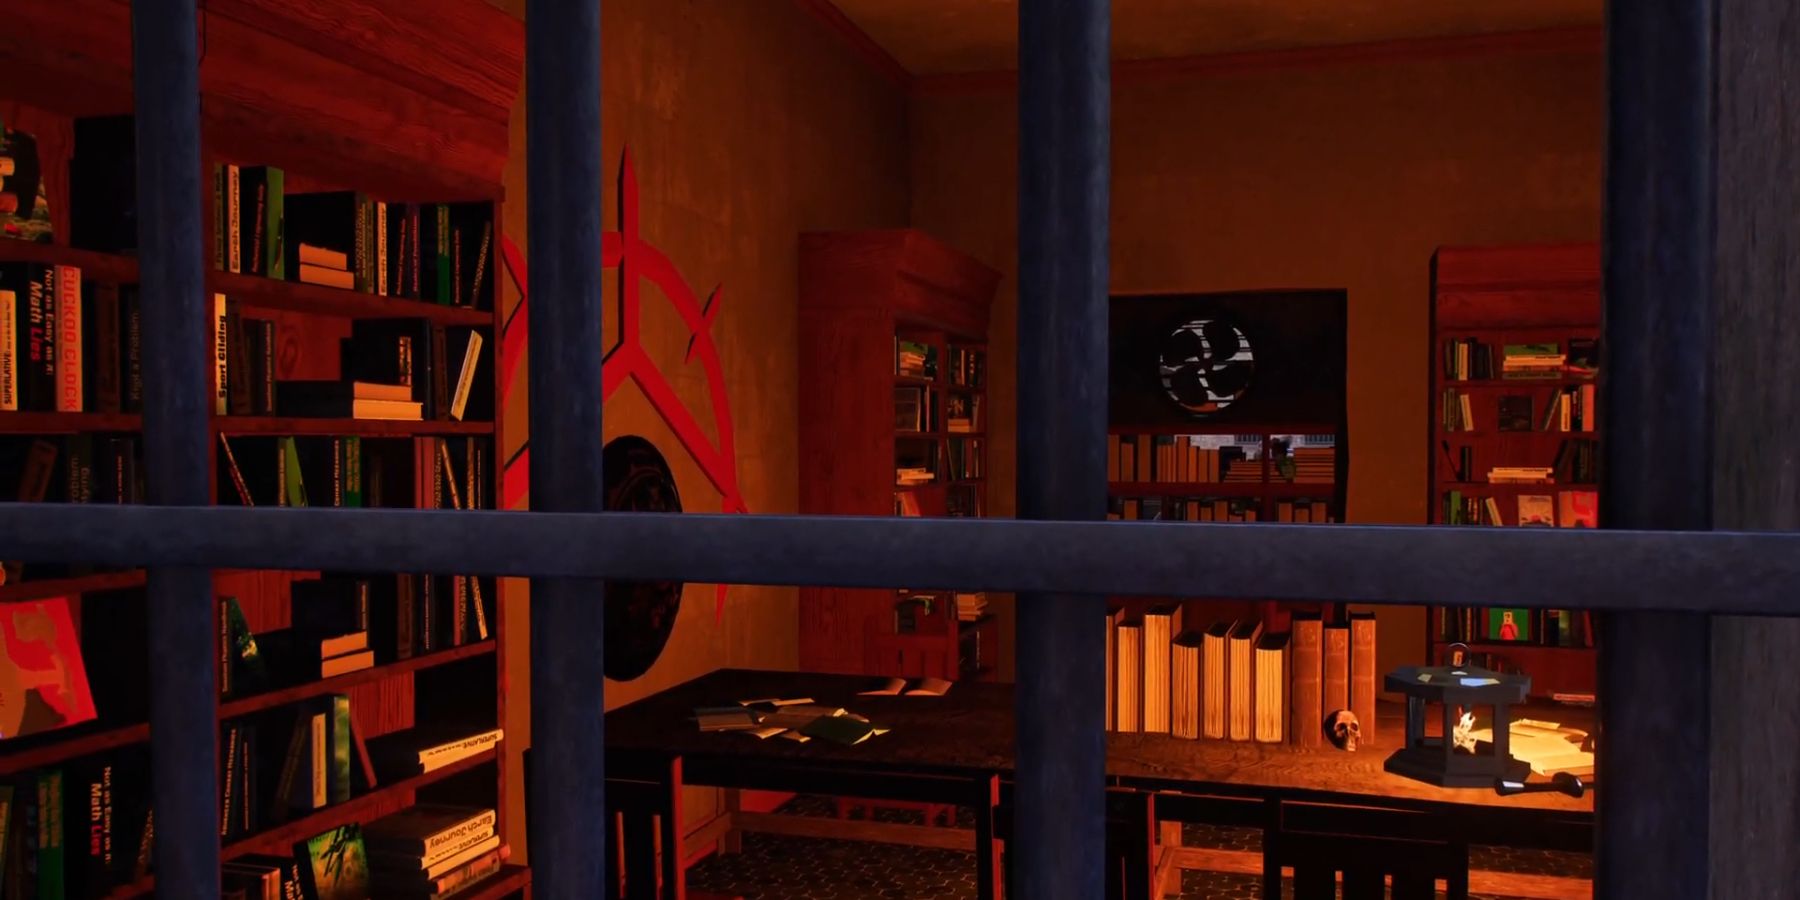 The camera is looking through a barred window at a room full of books and weapons. A black and red symbol resembling and eye is on the wall.